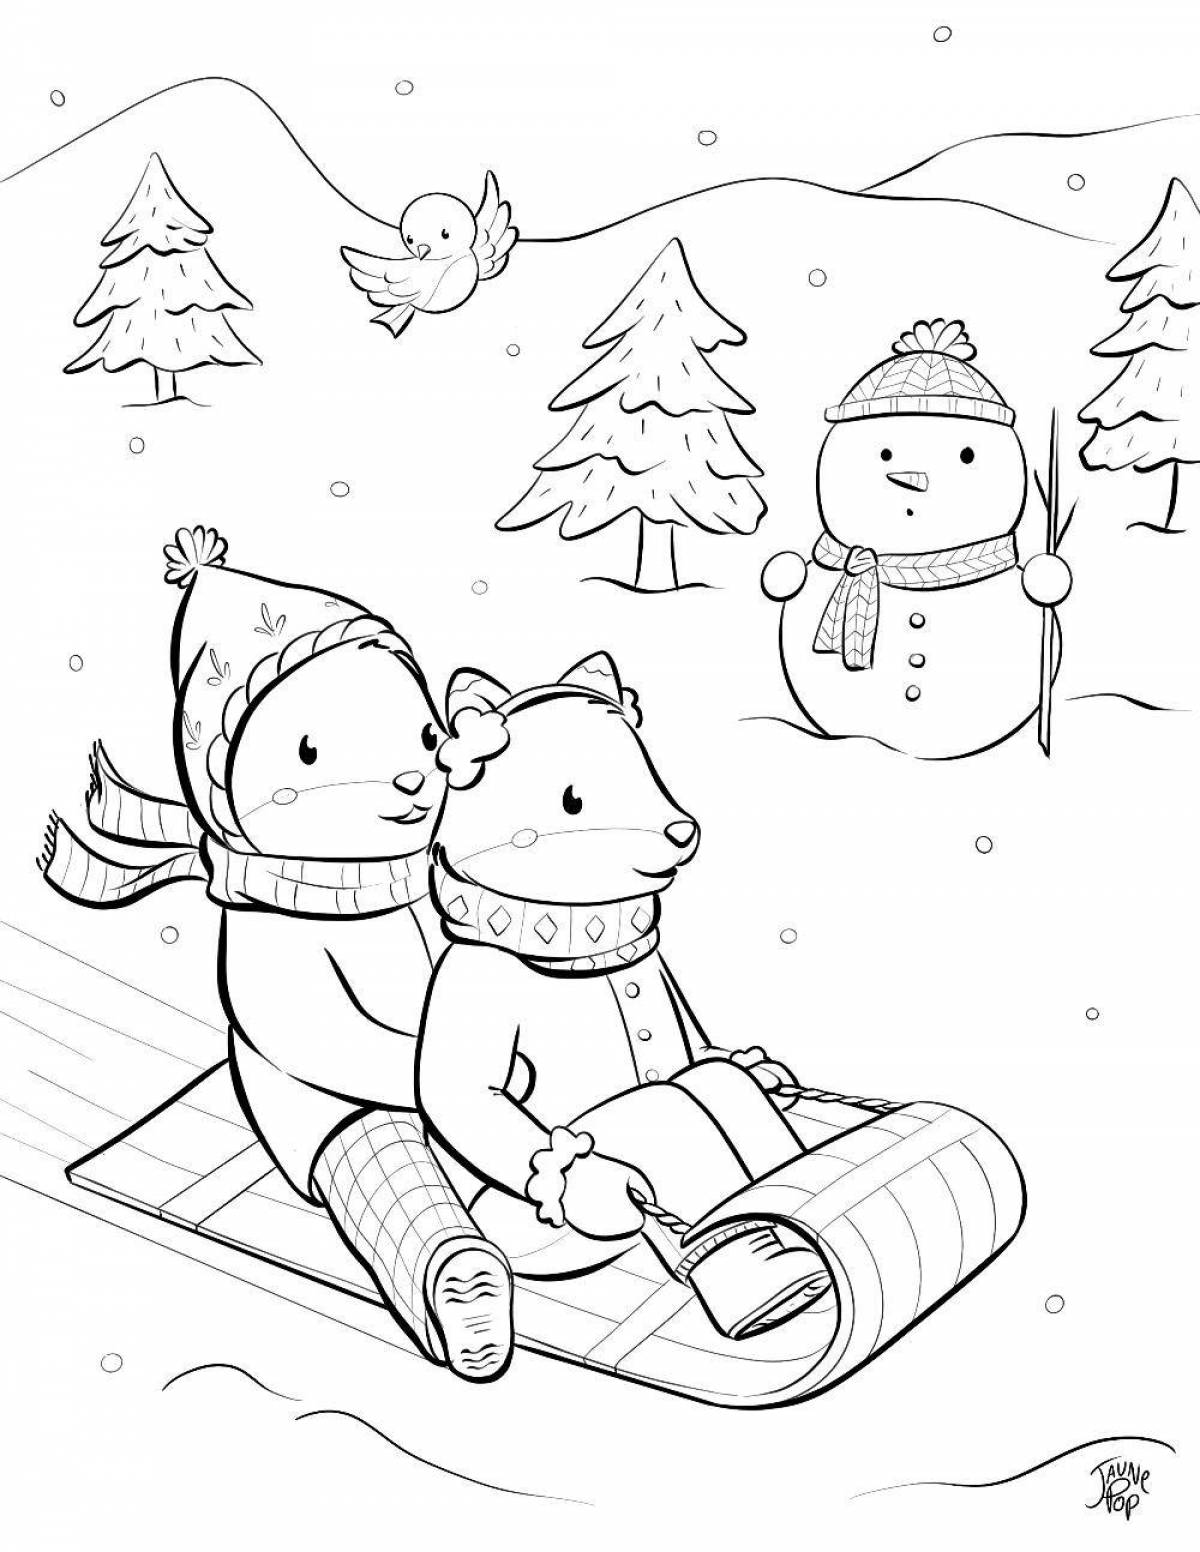 Large winter coloring book for adults